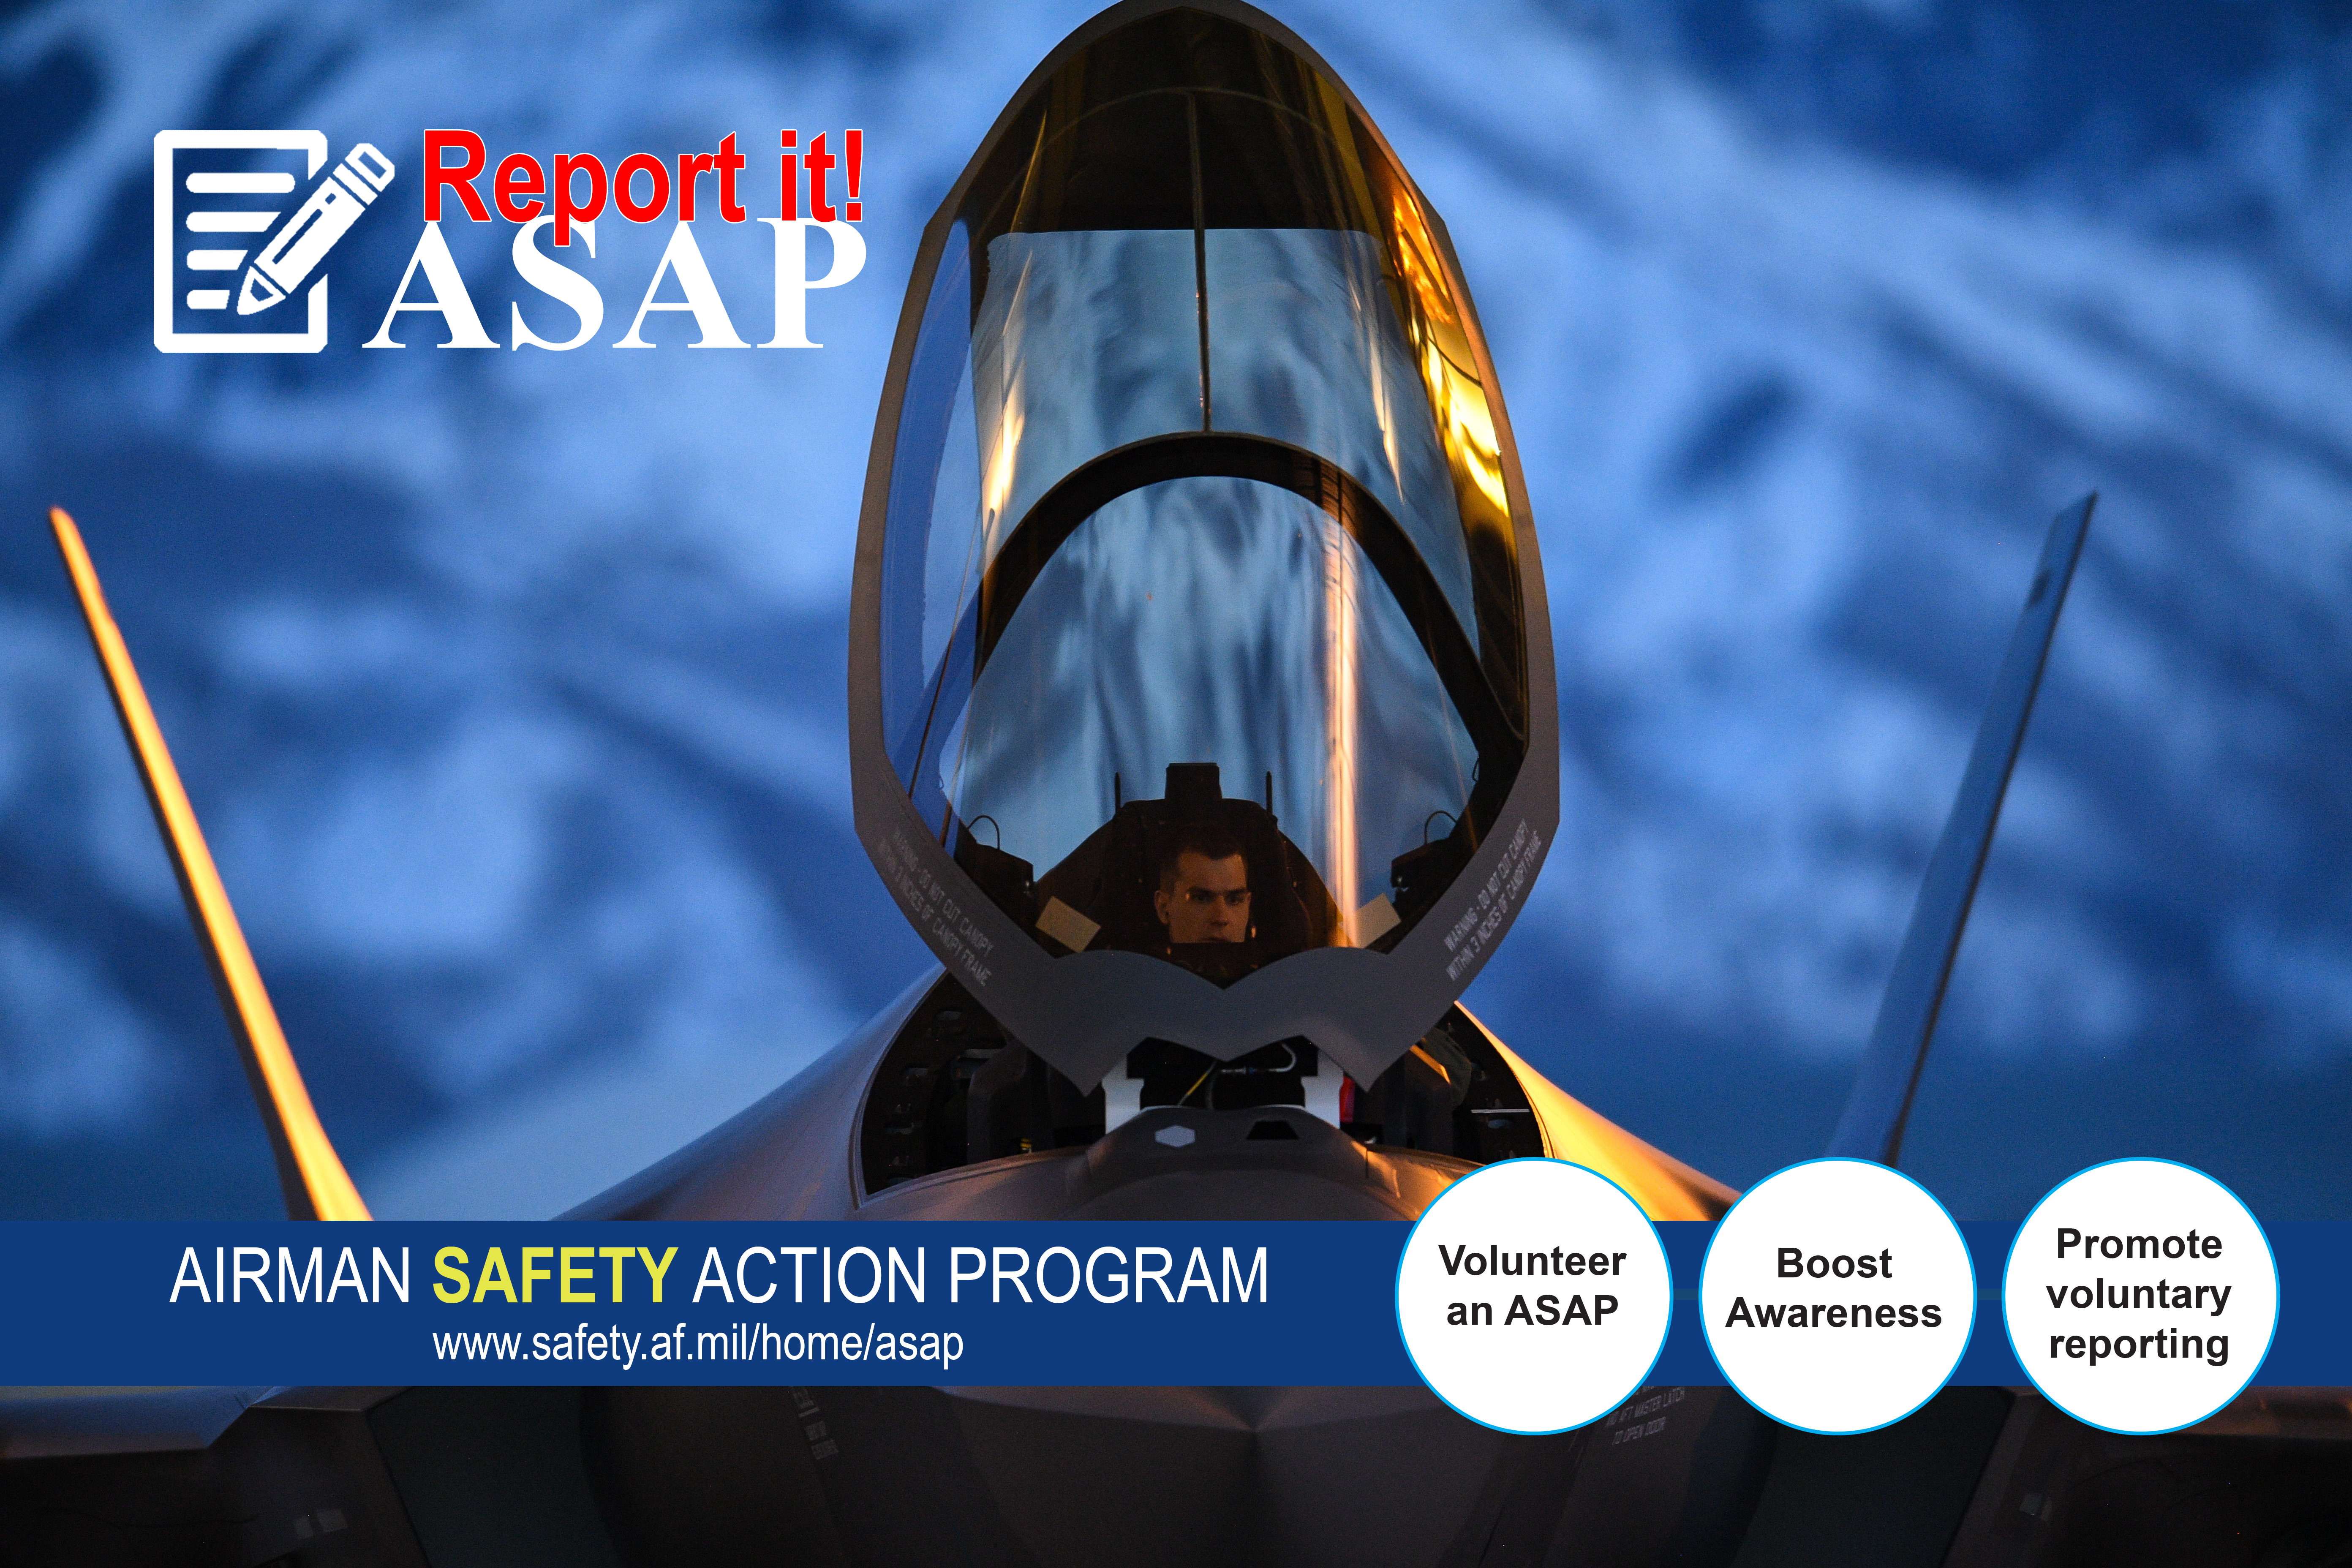 Link to Airman Safety Action Program Aviation poster